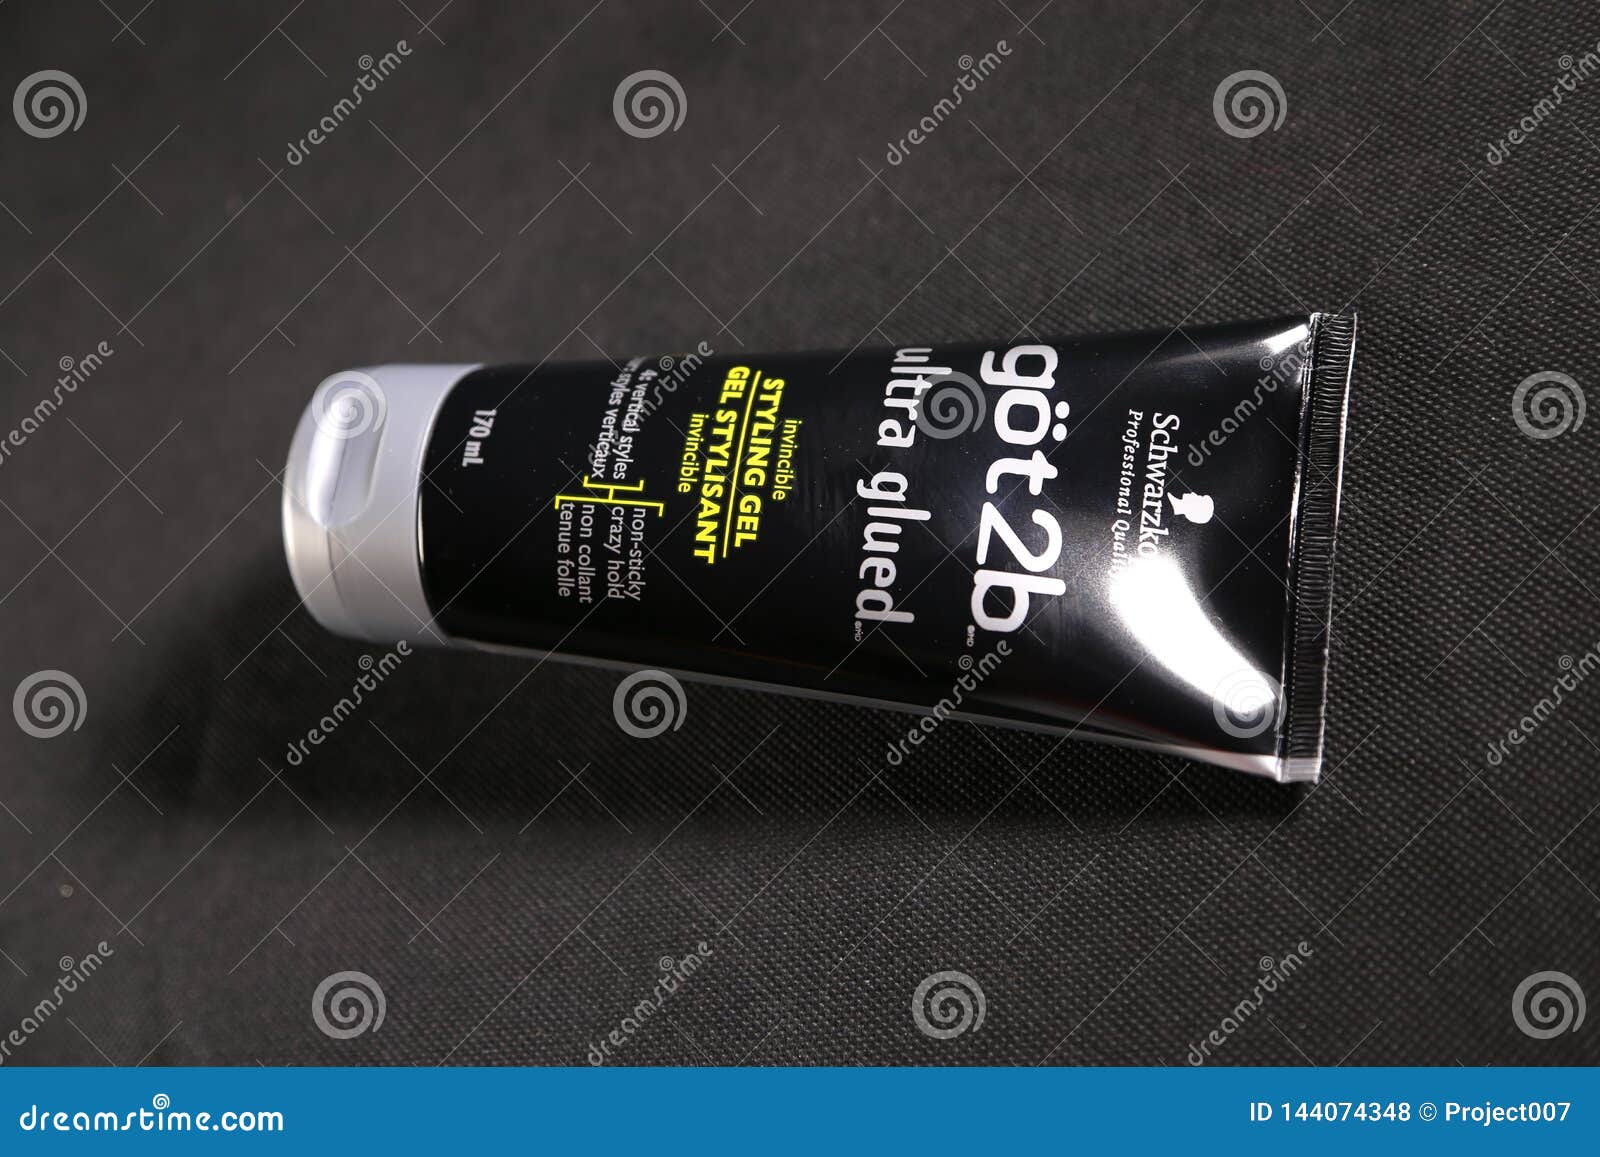 Schwarzkopf- Hair Gel Brand for Editorial News Story Cover about  Manufacturing of Gel for Hair Styling Editorial Stock Photo - Image of  glue, front: 144074348